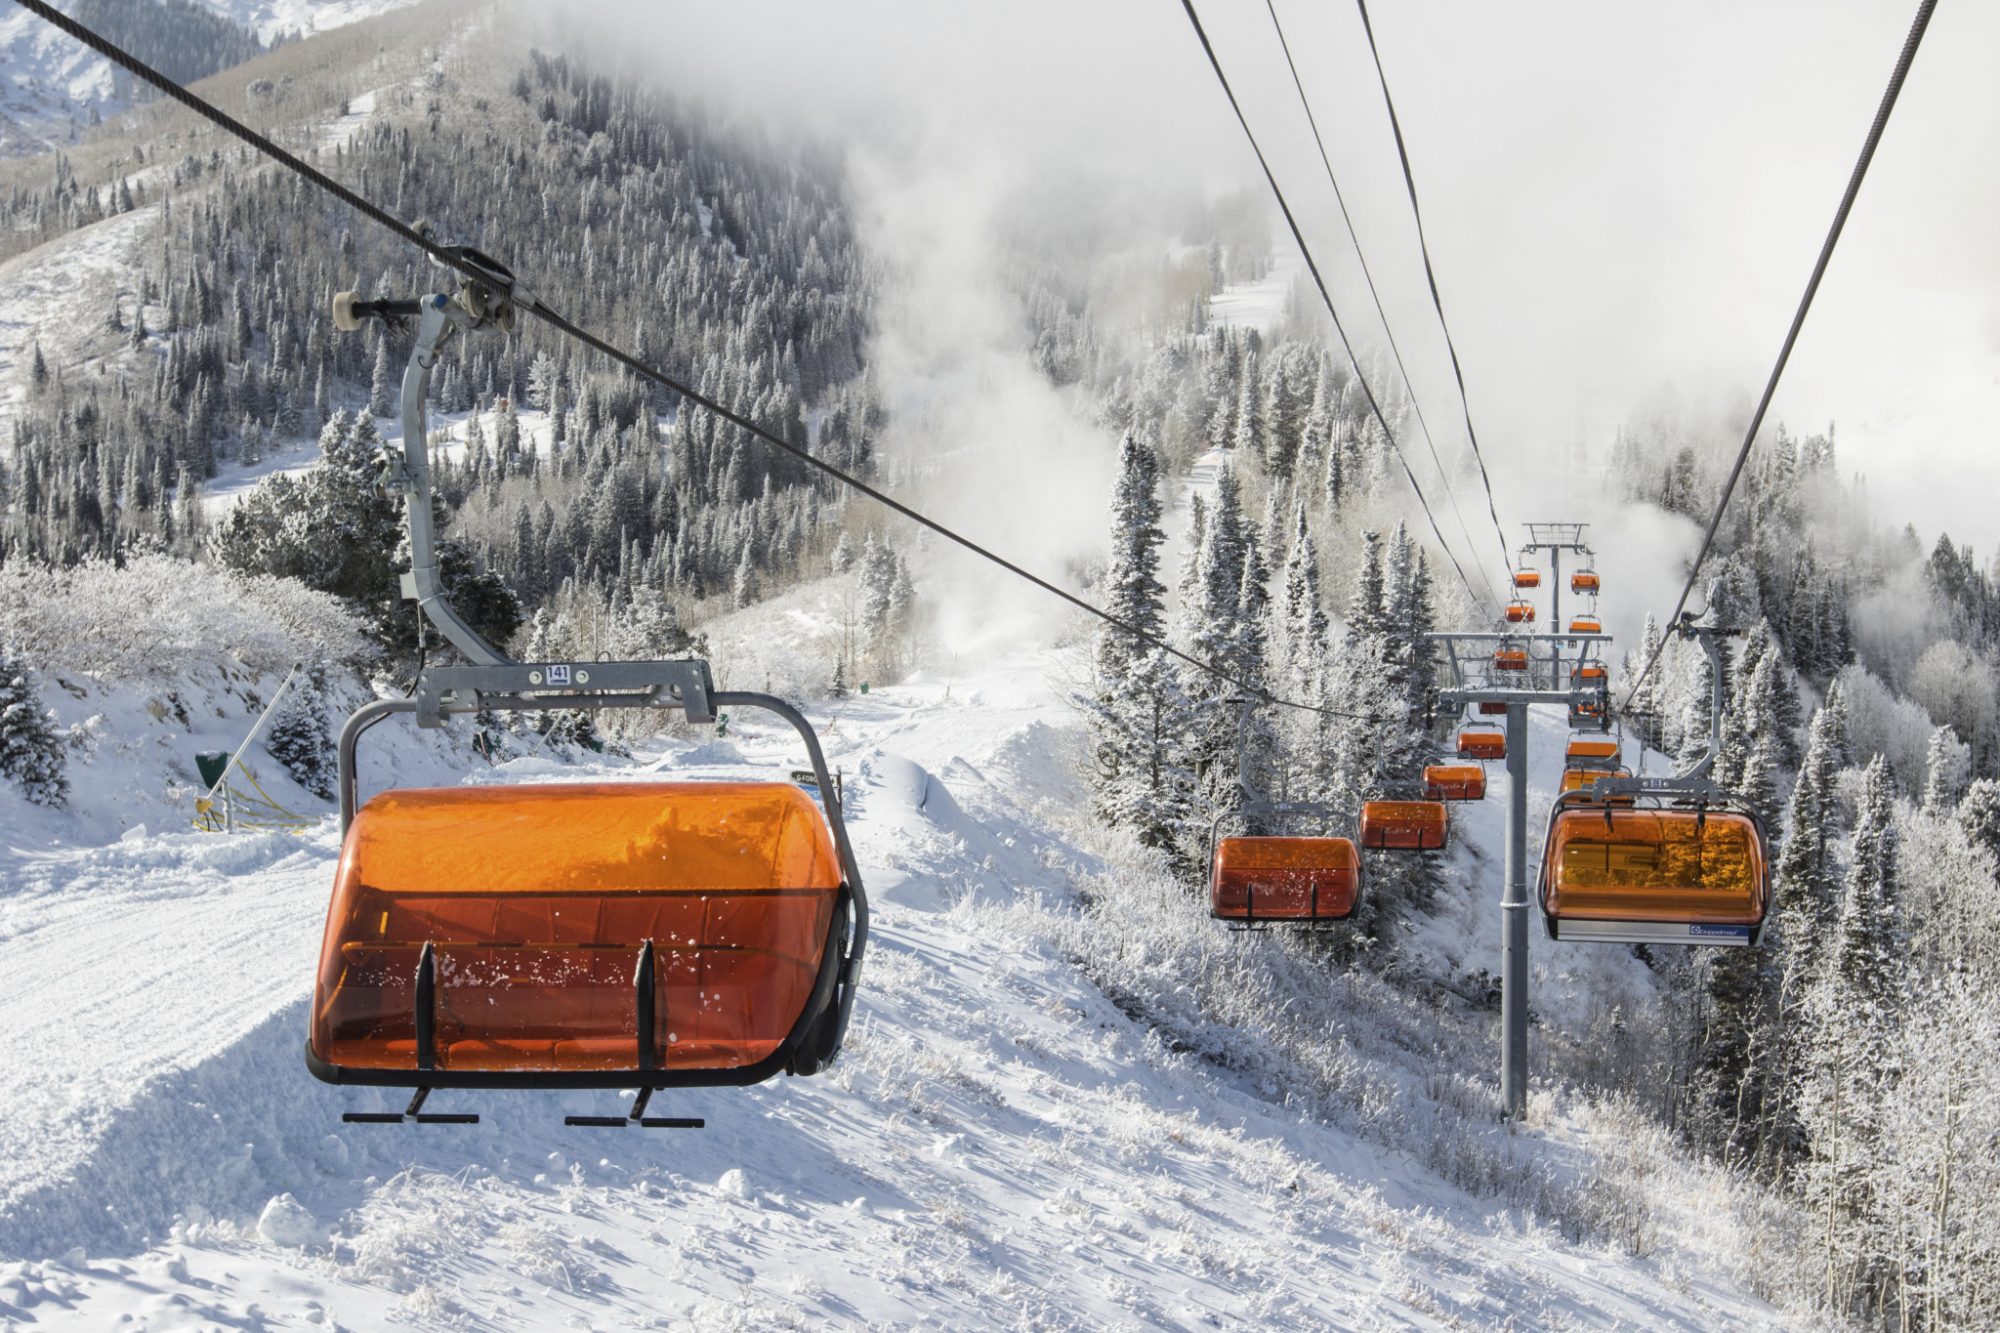 Park City orange bubble. photo: Vail Resorts. How can we envision ski resorts opening with social distancing for the 2020-21 ski season?